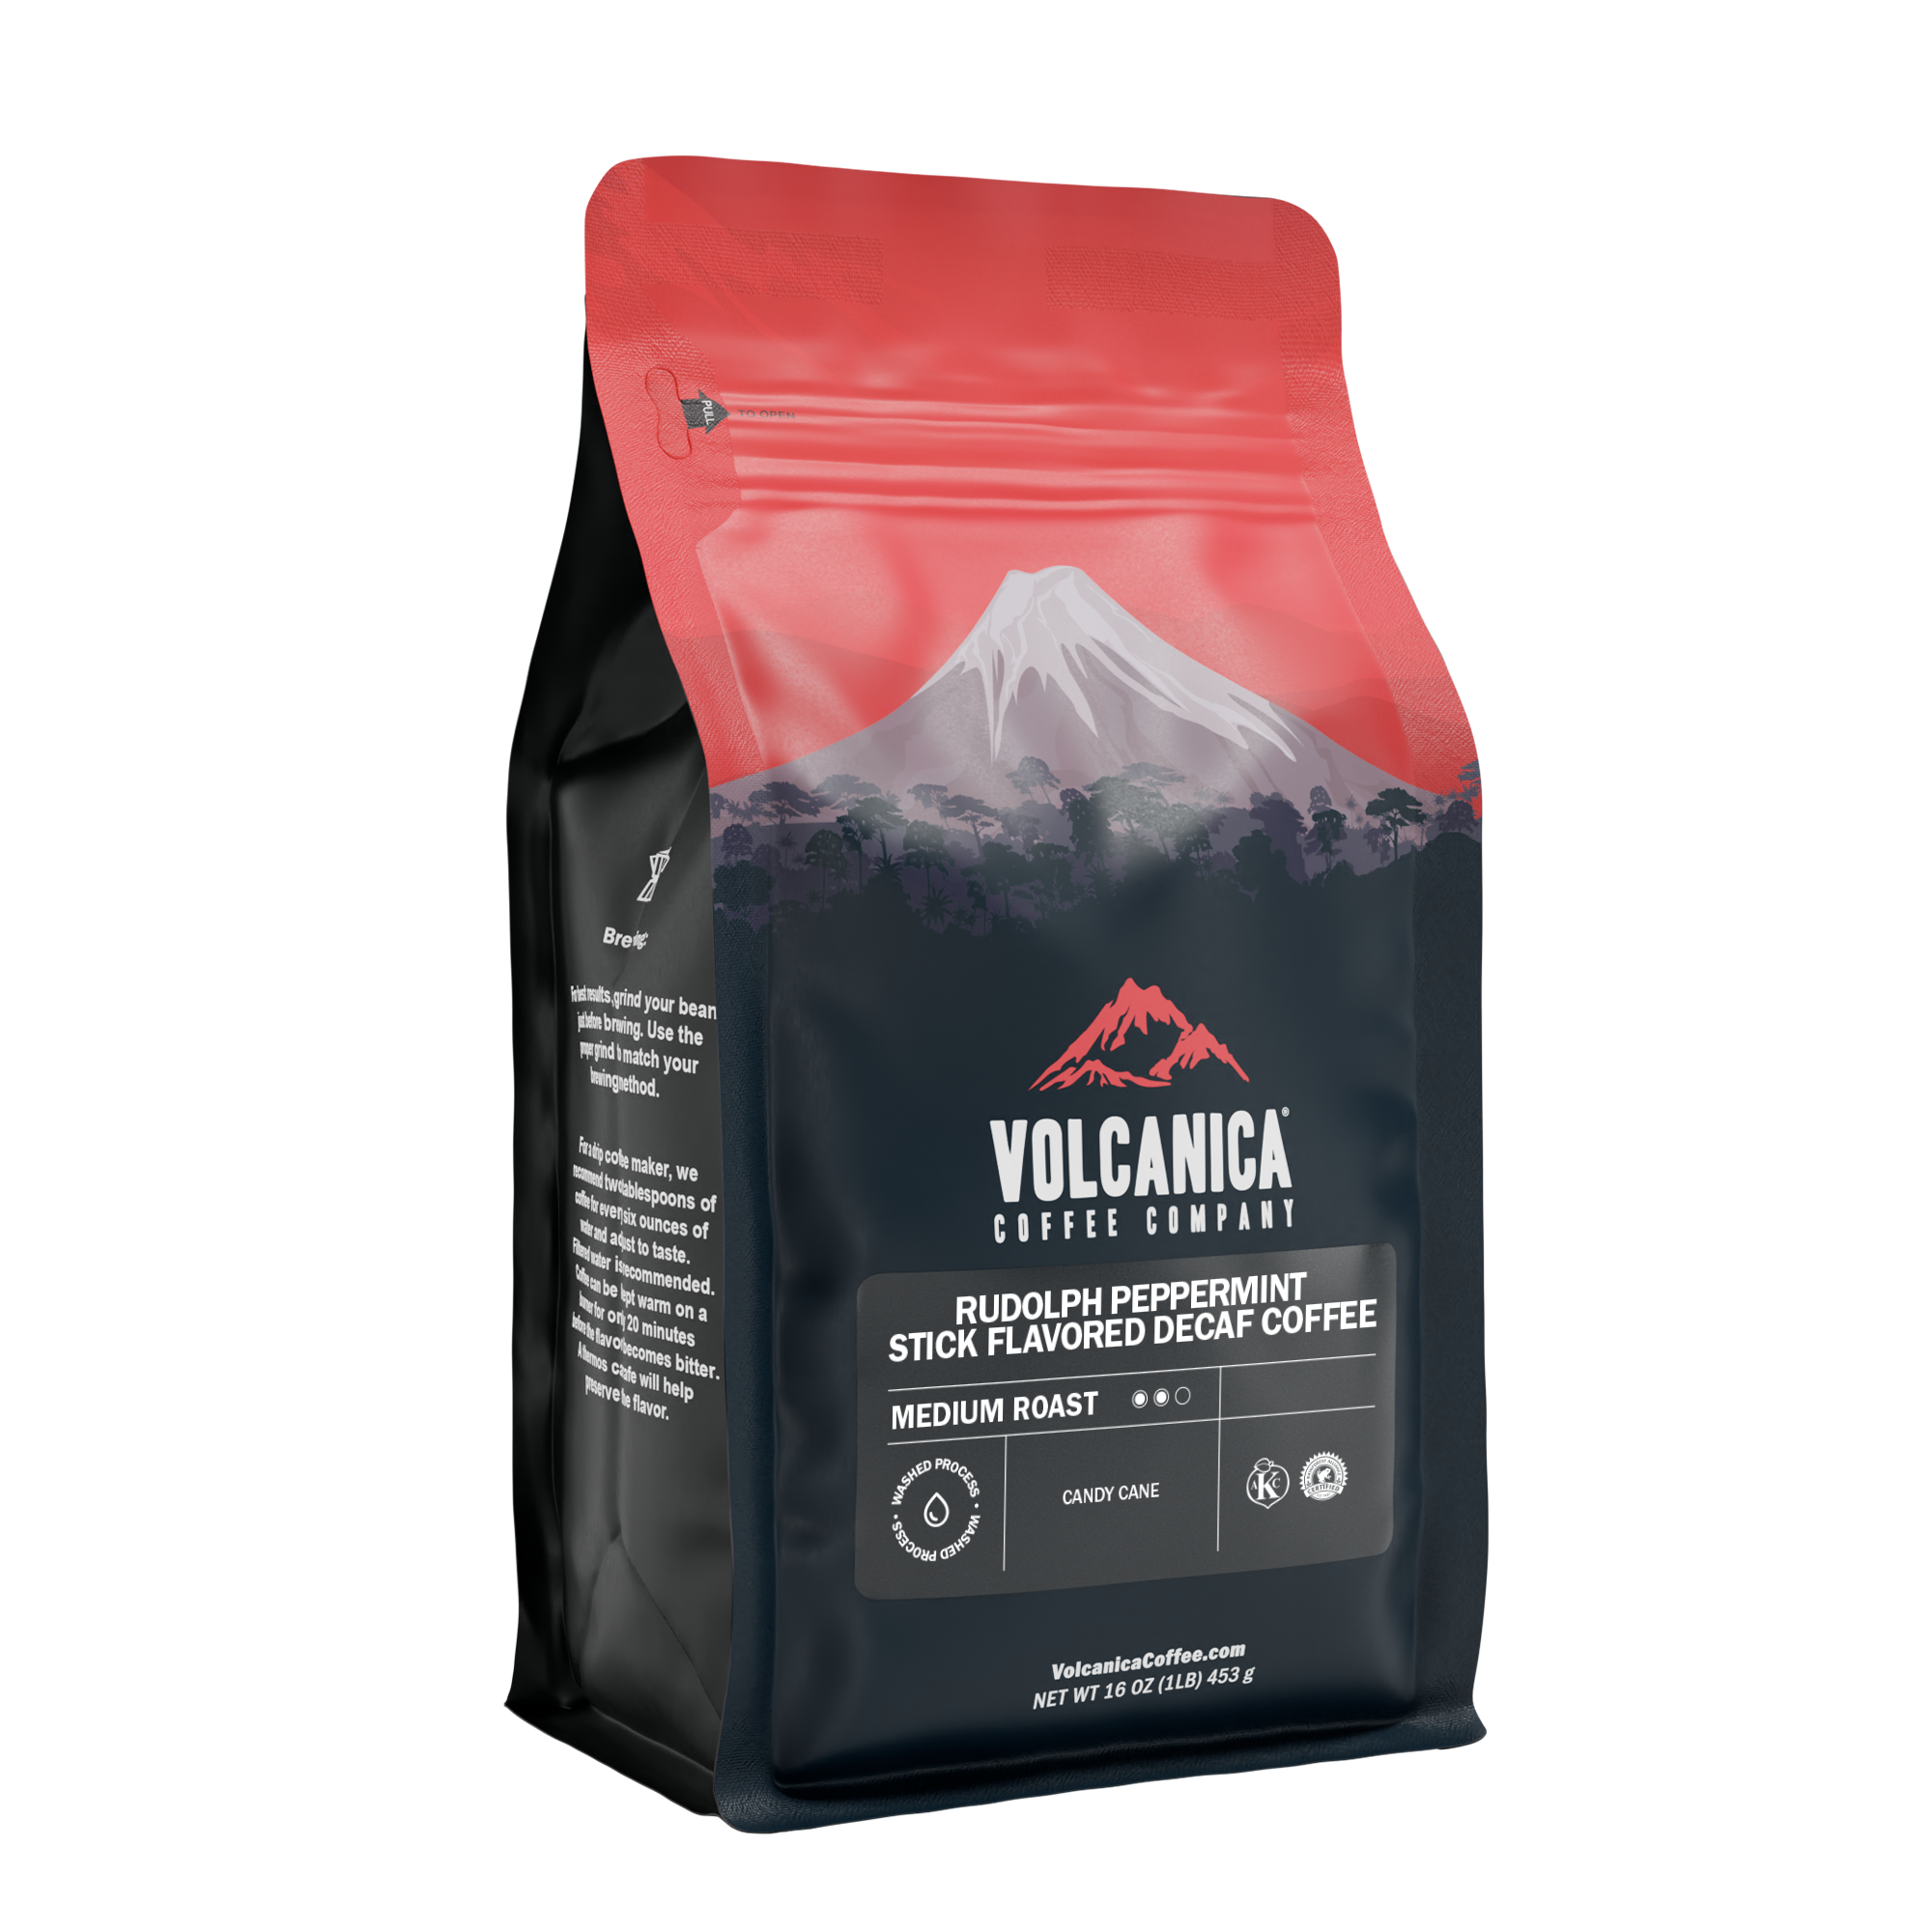  Rudolph Peppermint Stick Decaf Flavored Coffee - Volcanica Coffee